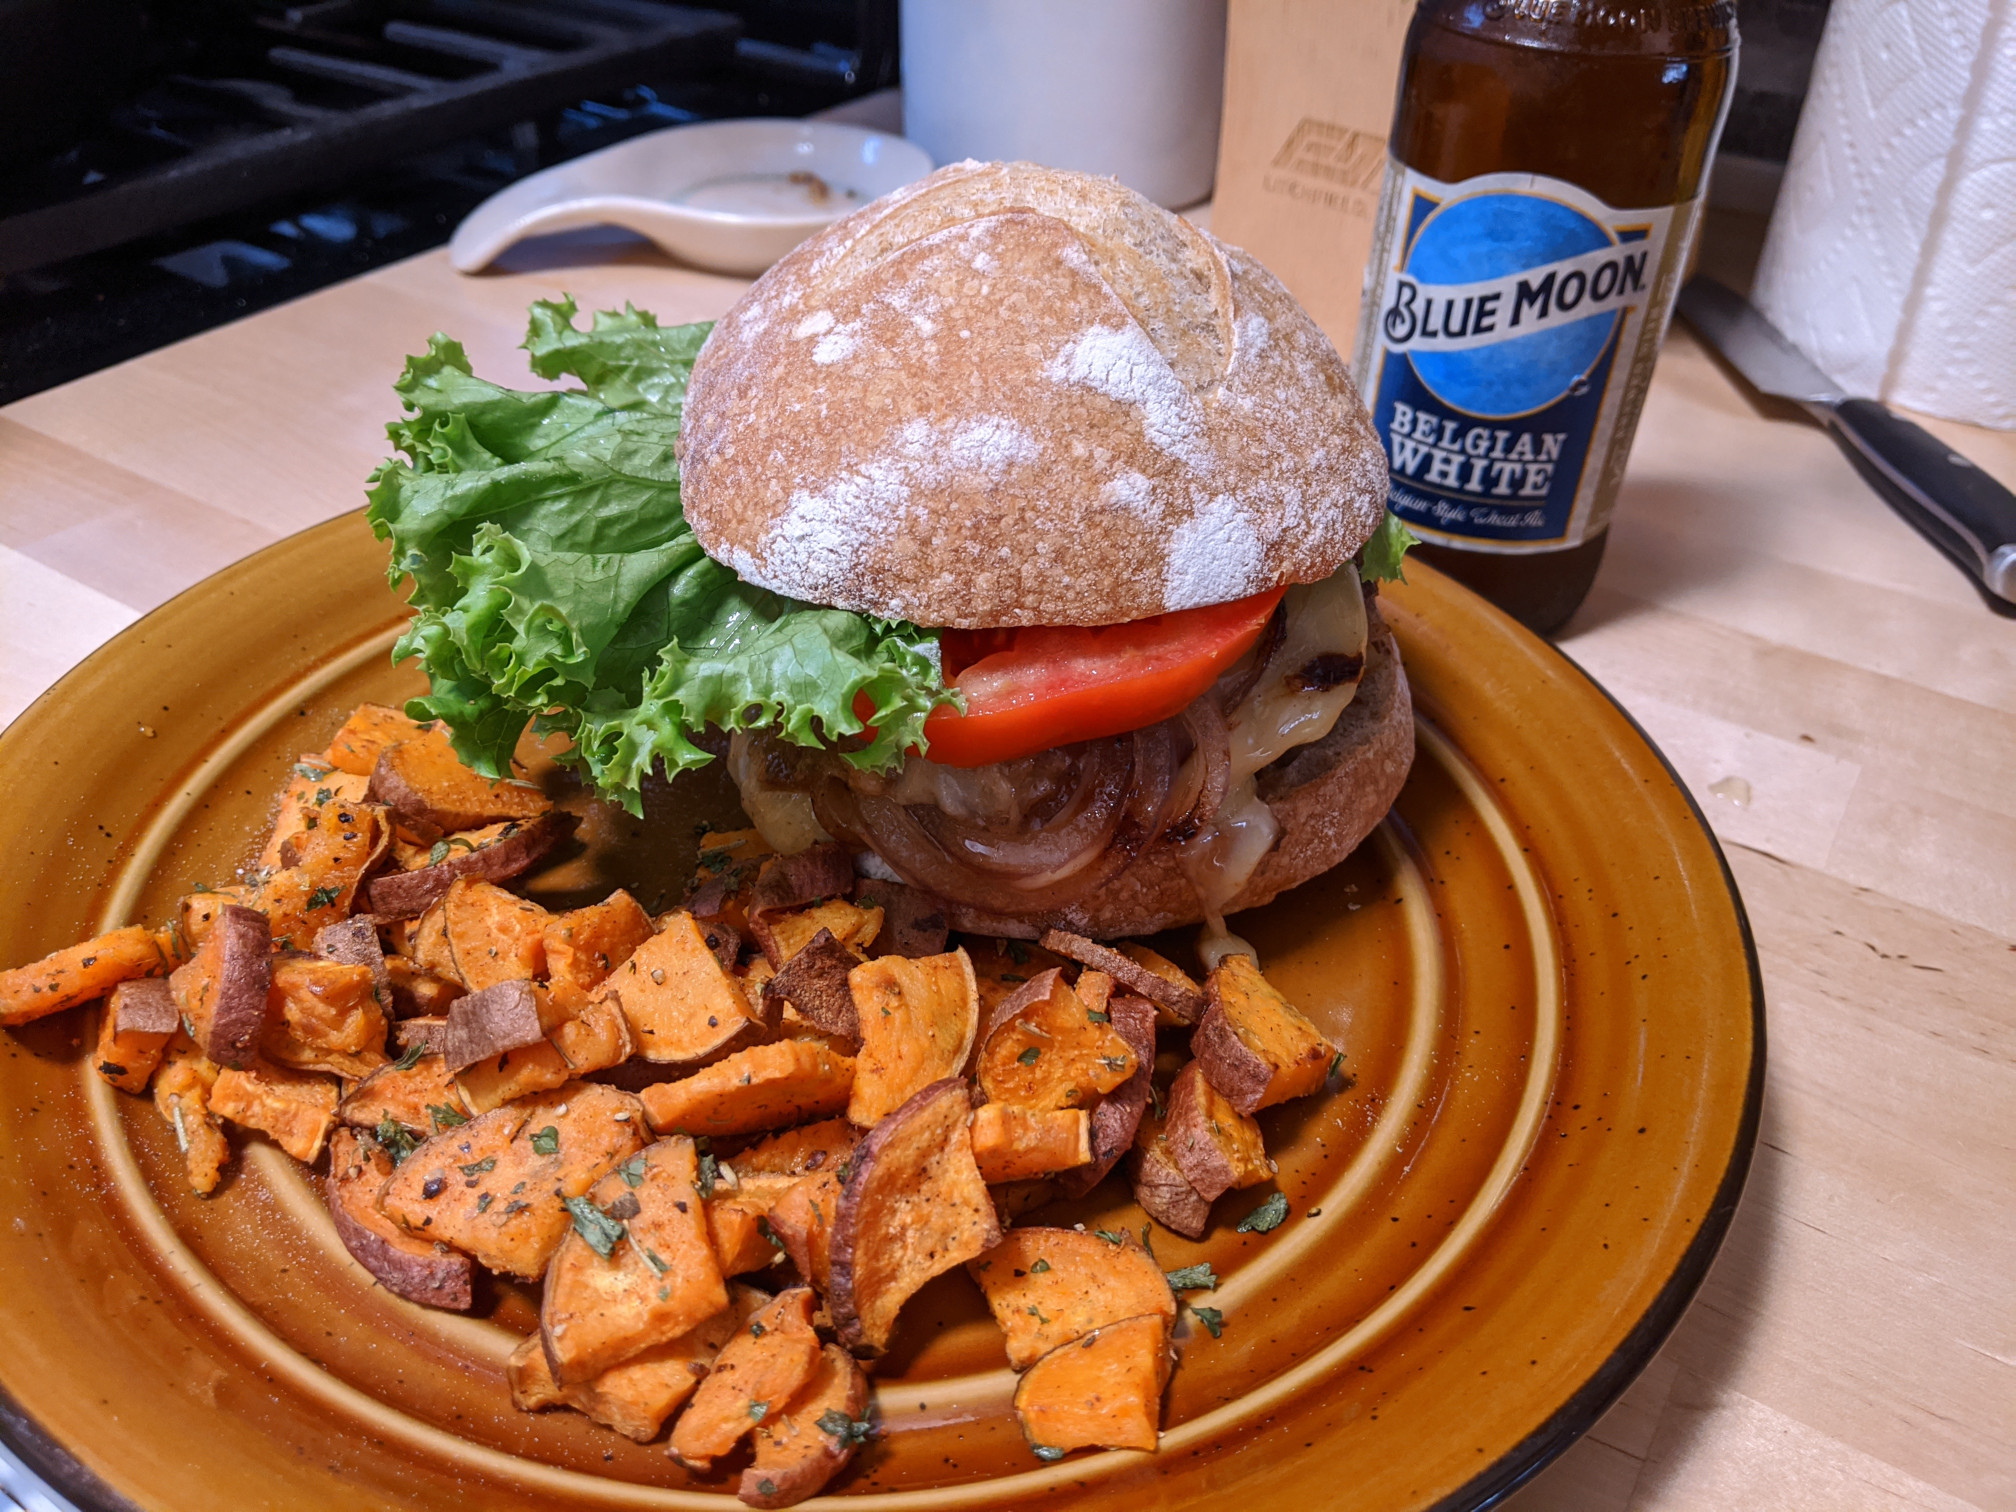 Homemade burger with Morbier cheese